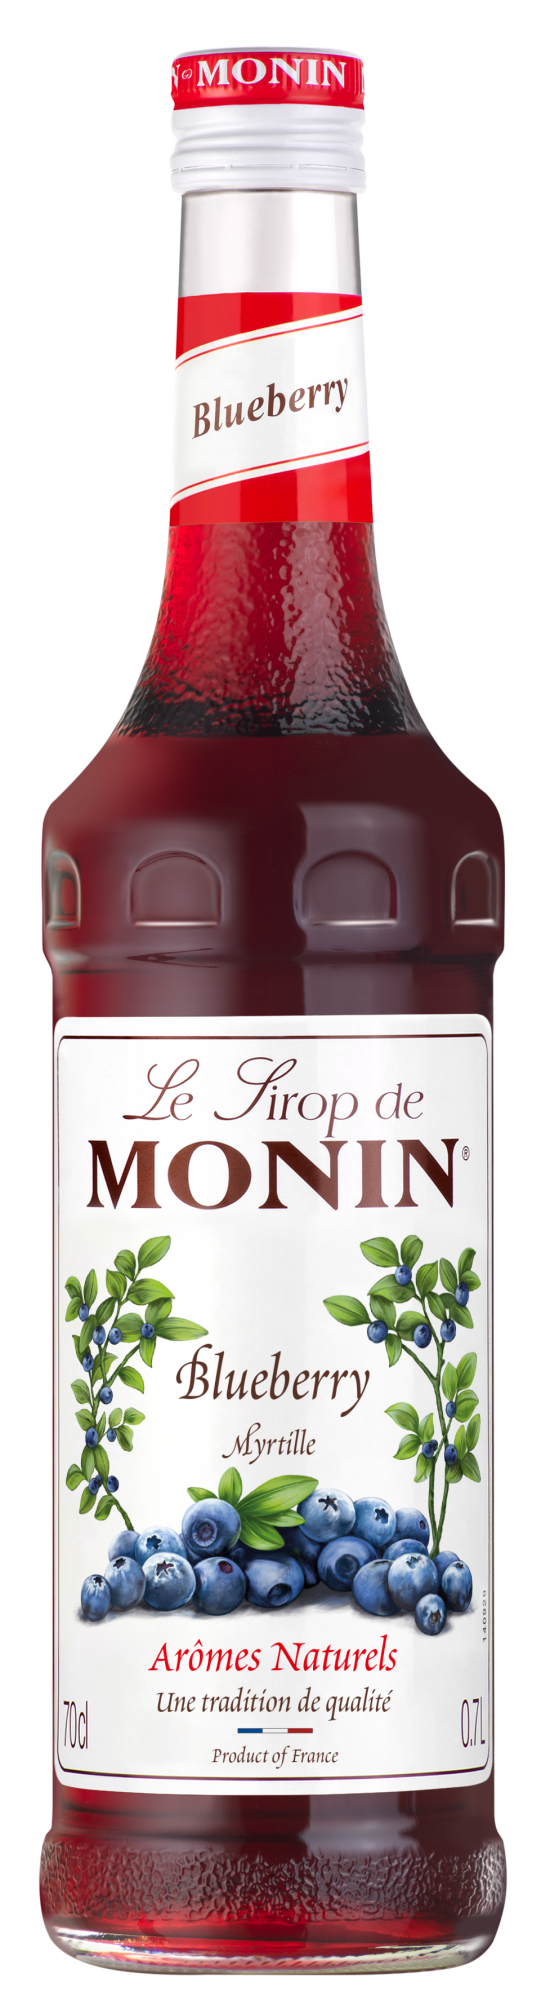 Buy Monin Blueberry Syrup. It has the tangy, acidic flavor qualities of fresh blueberries, followed by a creamy sweet finish.